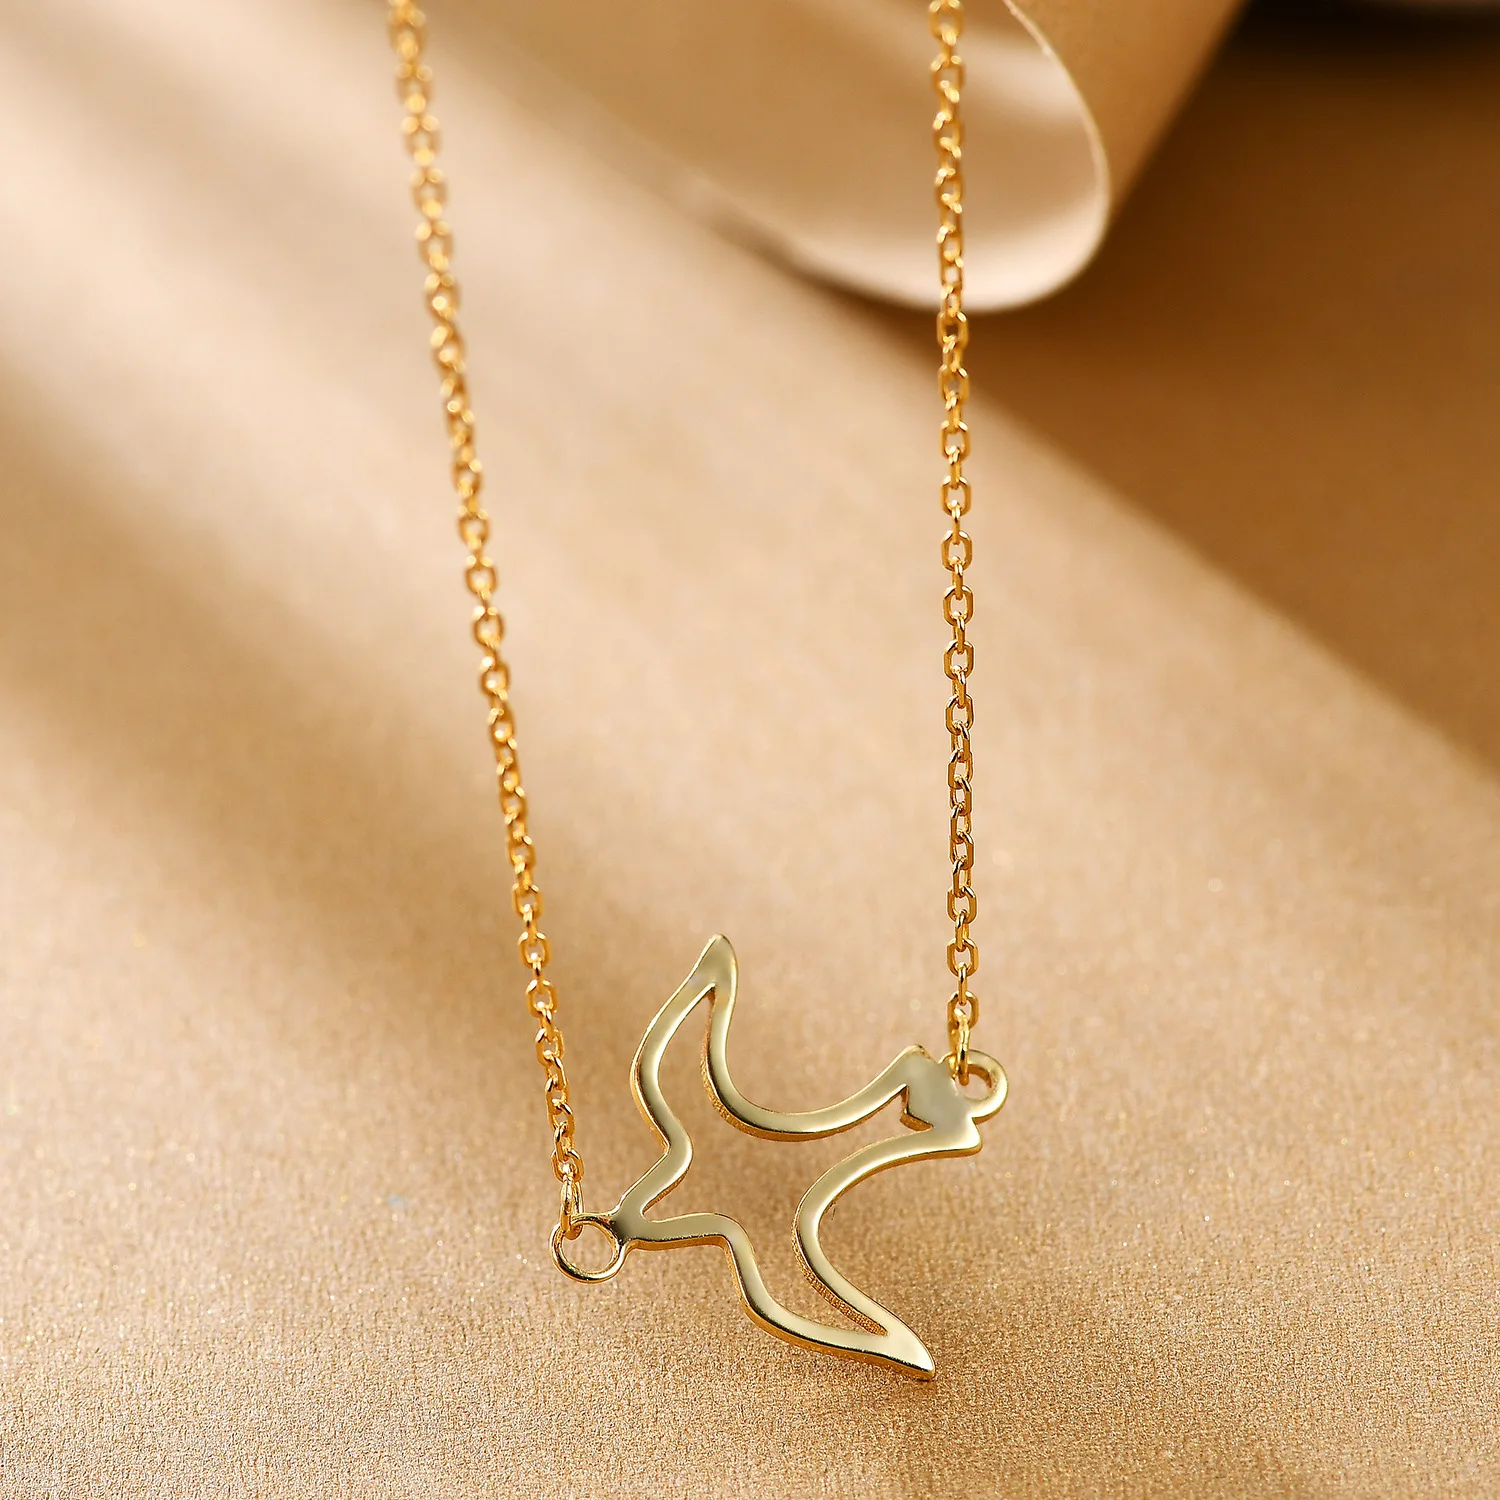 

Vintage Style Freedom Bird Necklace 925 Sterling Silver Gold Plated Delicate Swallow Hollow Dove Pendant Necklace Jewelry